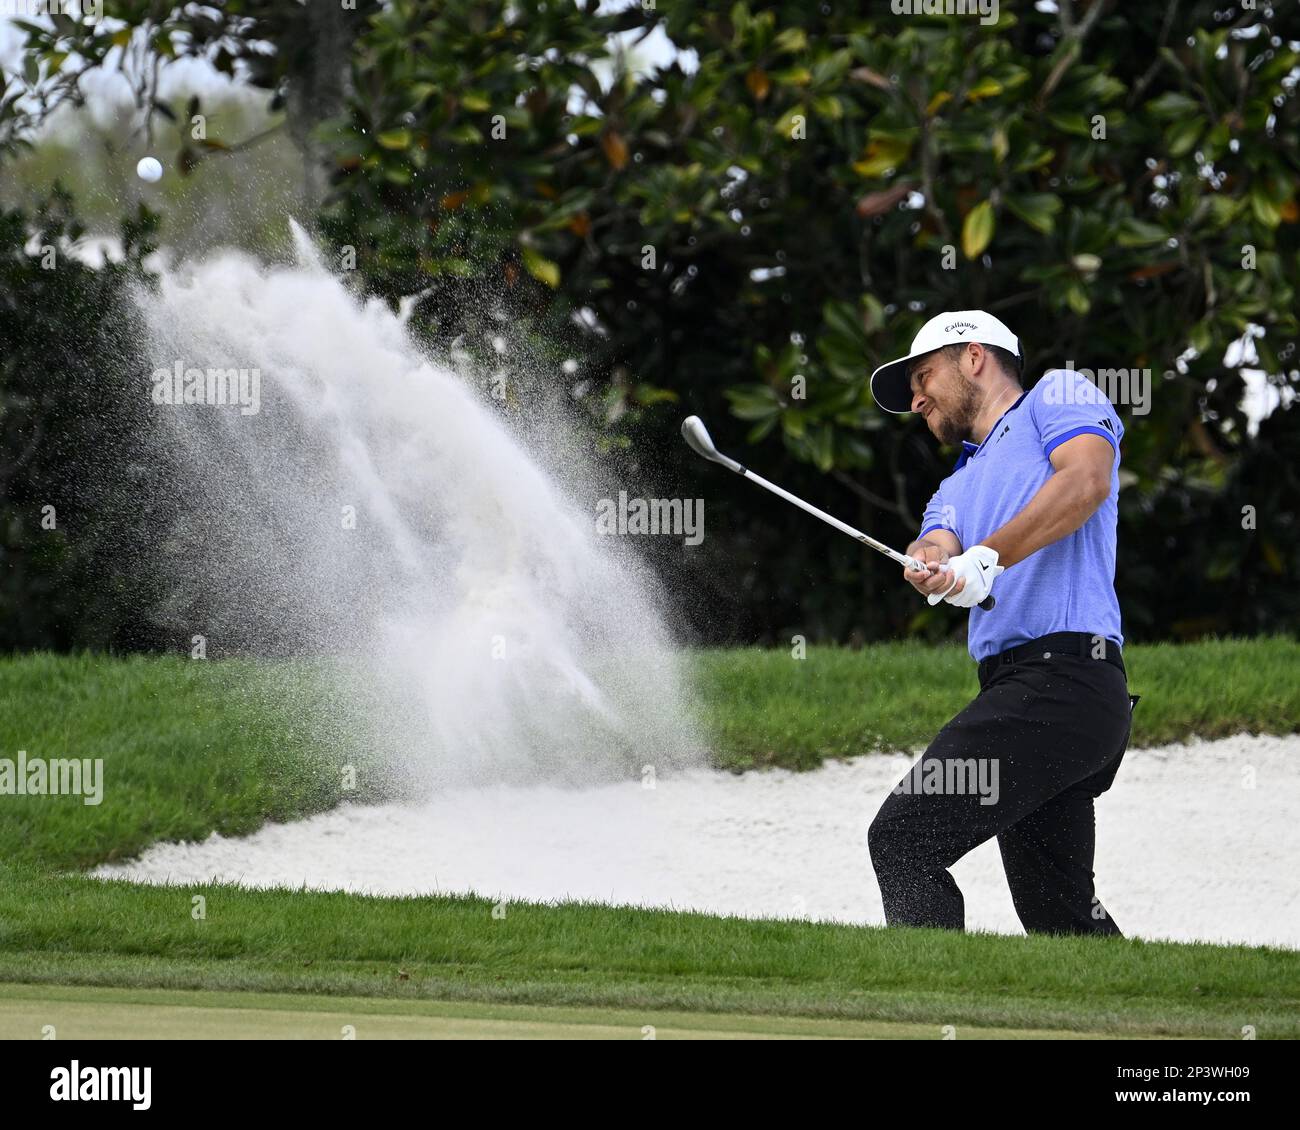 Orlando, United States. 05th Mar, 2023. Xander Schauffele from San Diego, Ca., makes a shot out of the bunker near the first green during the fourth and final round of the Arnold Palmer Invitational presented by Mastercard at the Bay Hill Club and Lodge in Orlando, Florida on Sunday, March 5, 2023. Photo by Joe Marino/UPI. Credit: UPI/Alamy Live News Stock Photo